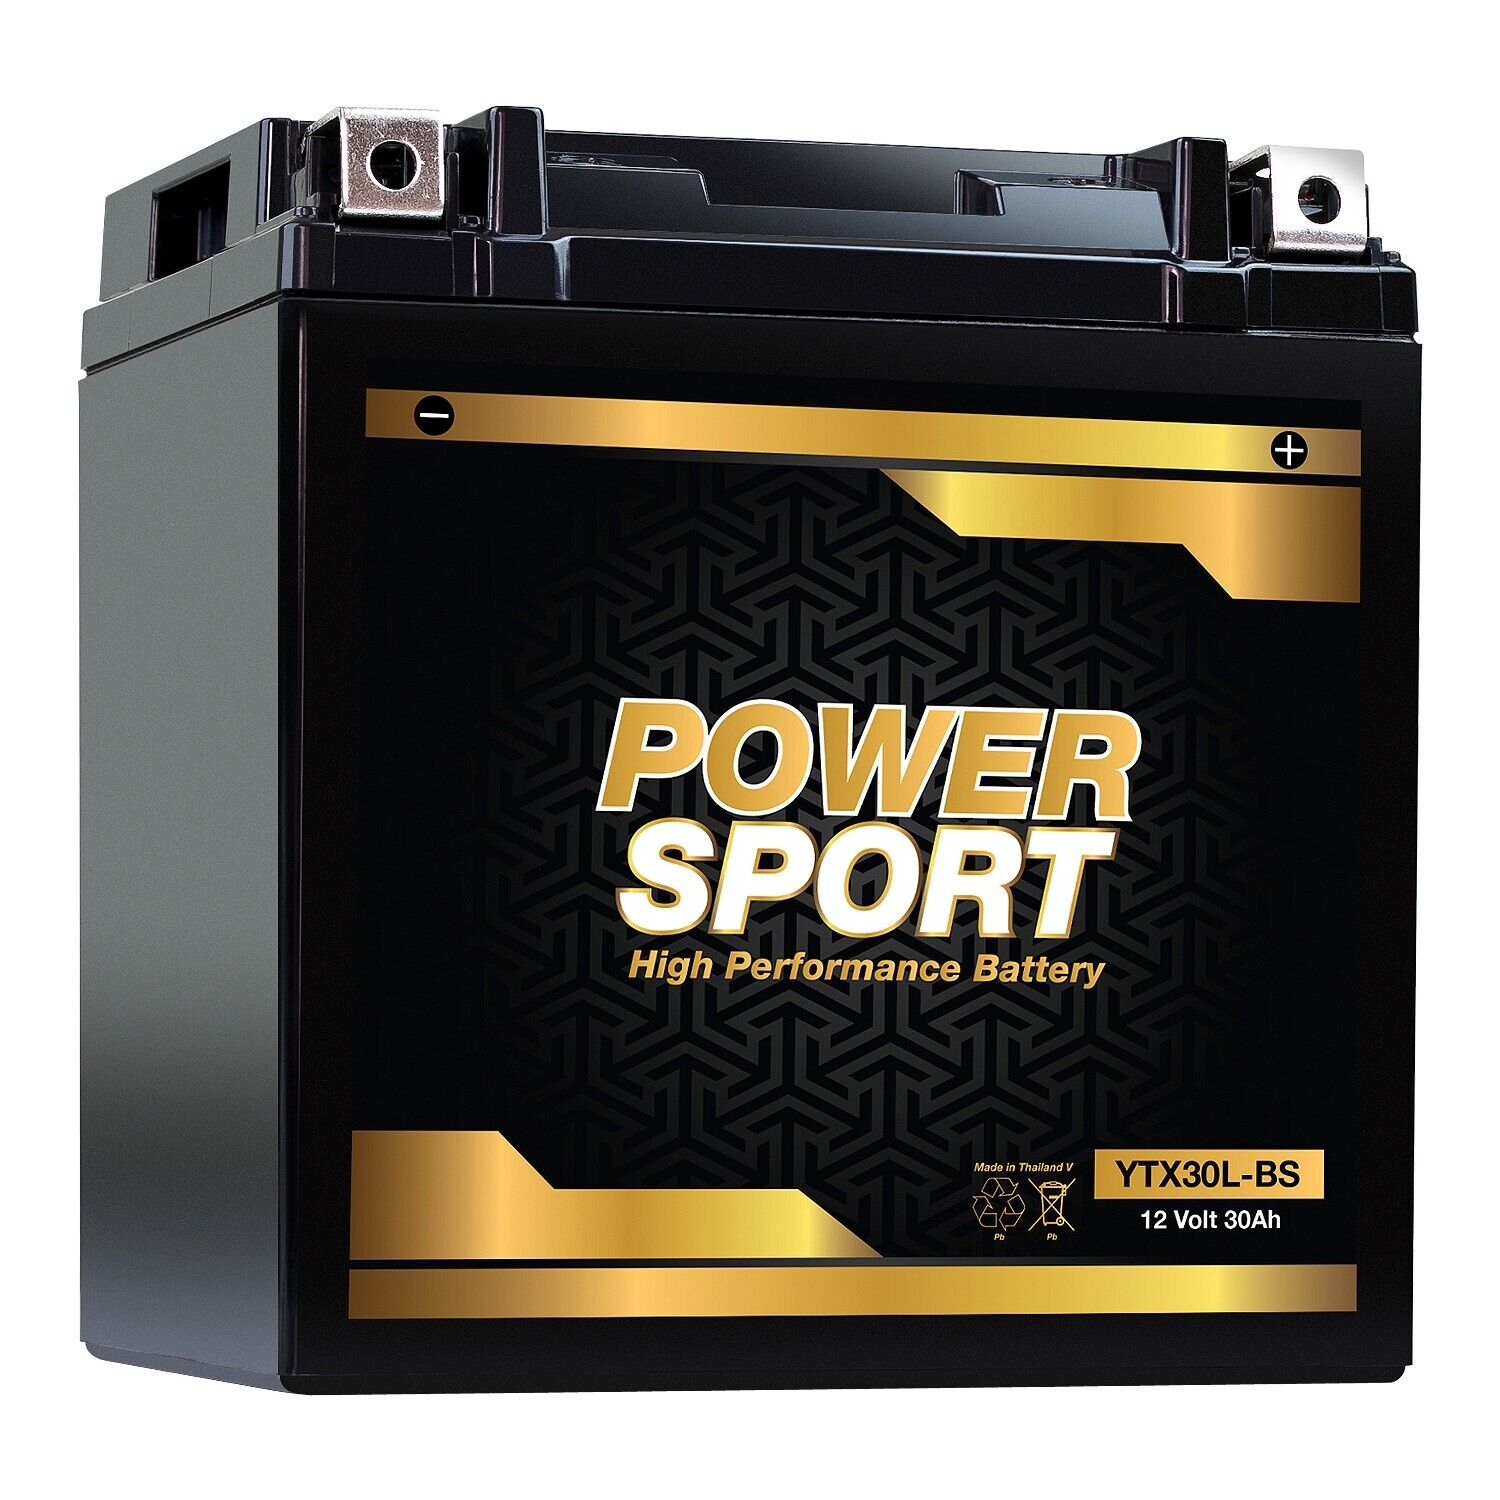 YTX30L-BS Motorcycle Battery Replacement for Yuasa YIX30L